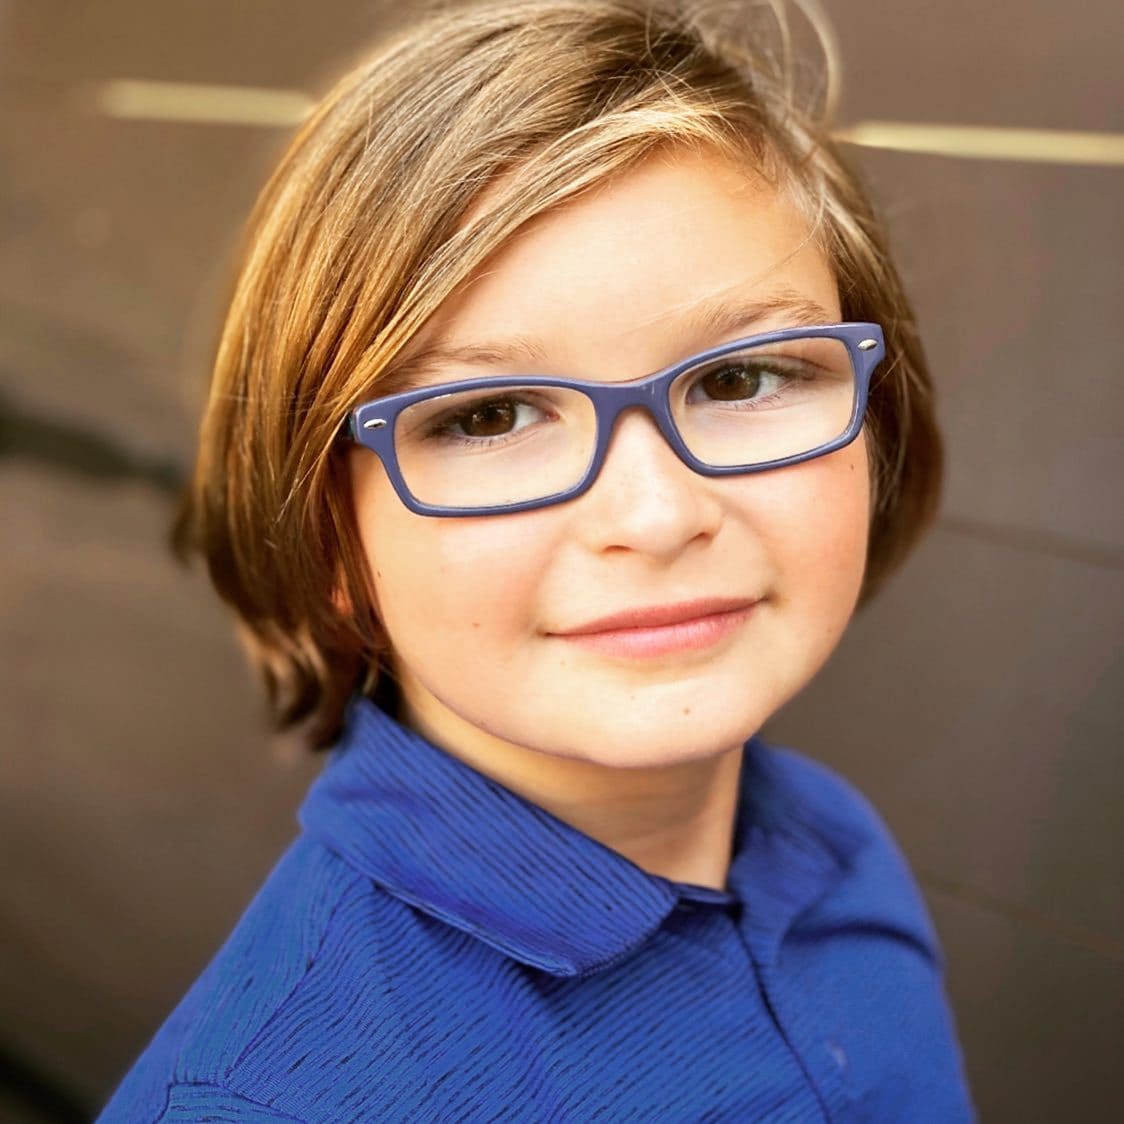 Ryder Allen Wiki, Age, Parents, Education, Family & More 9